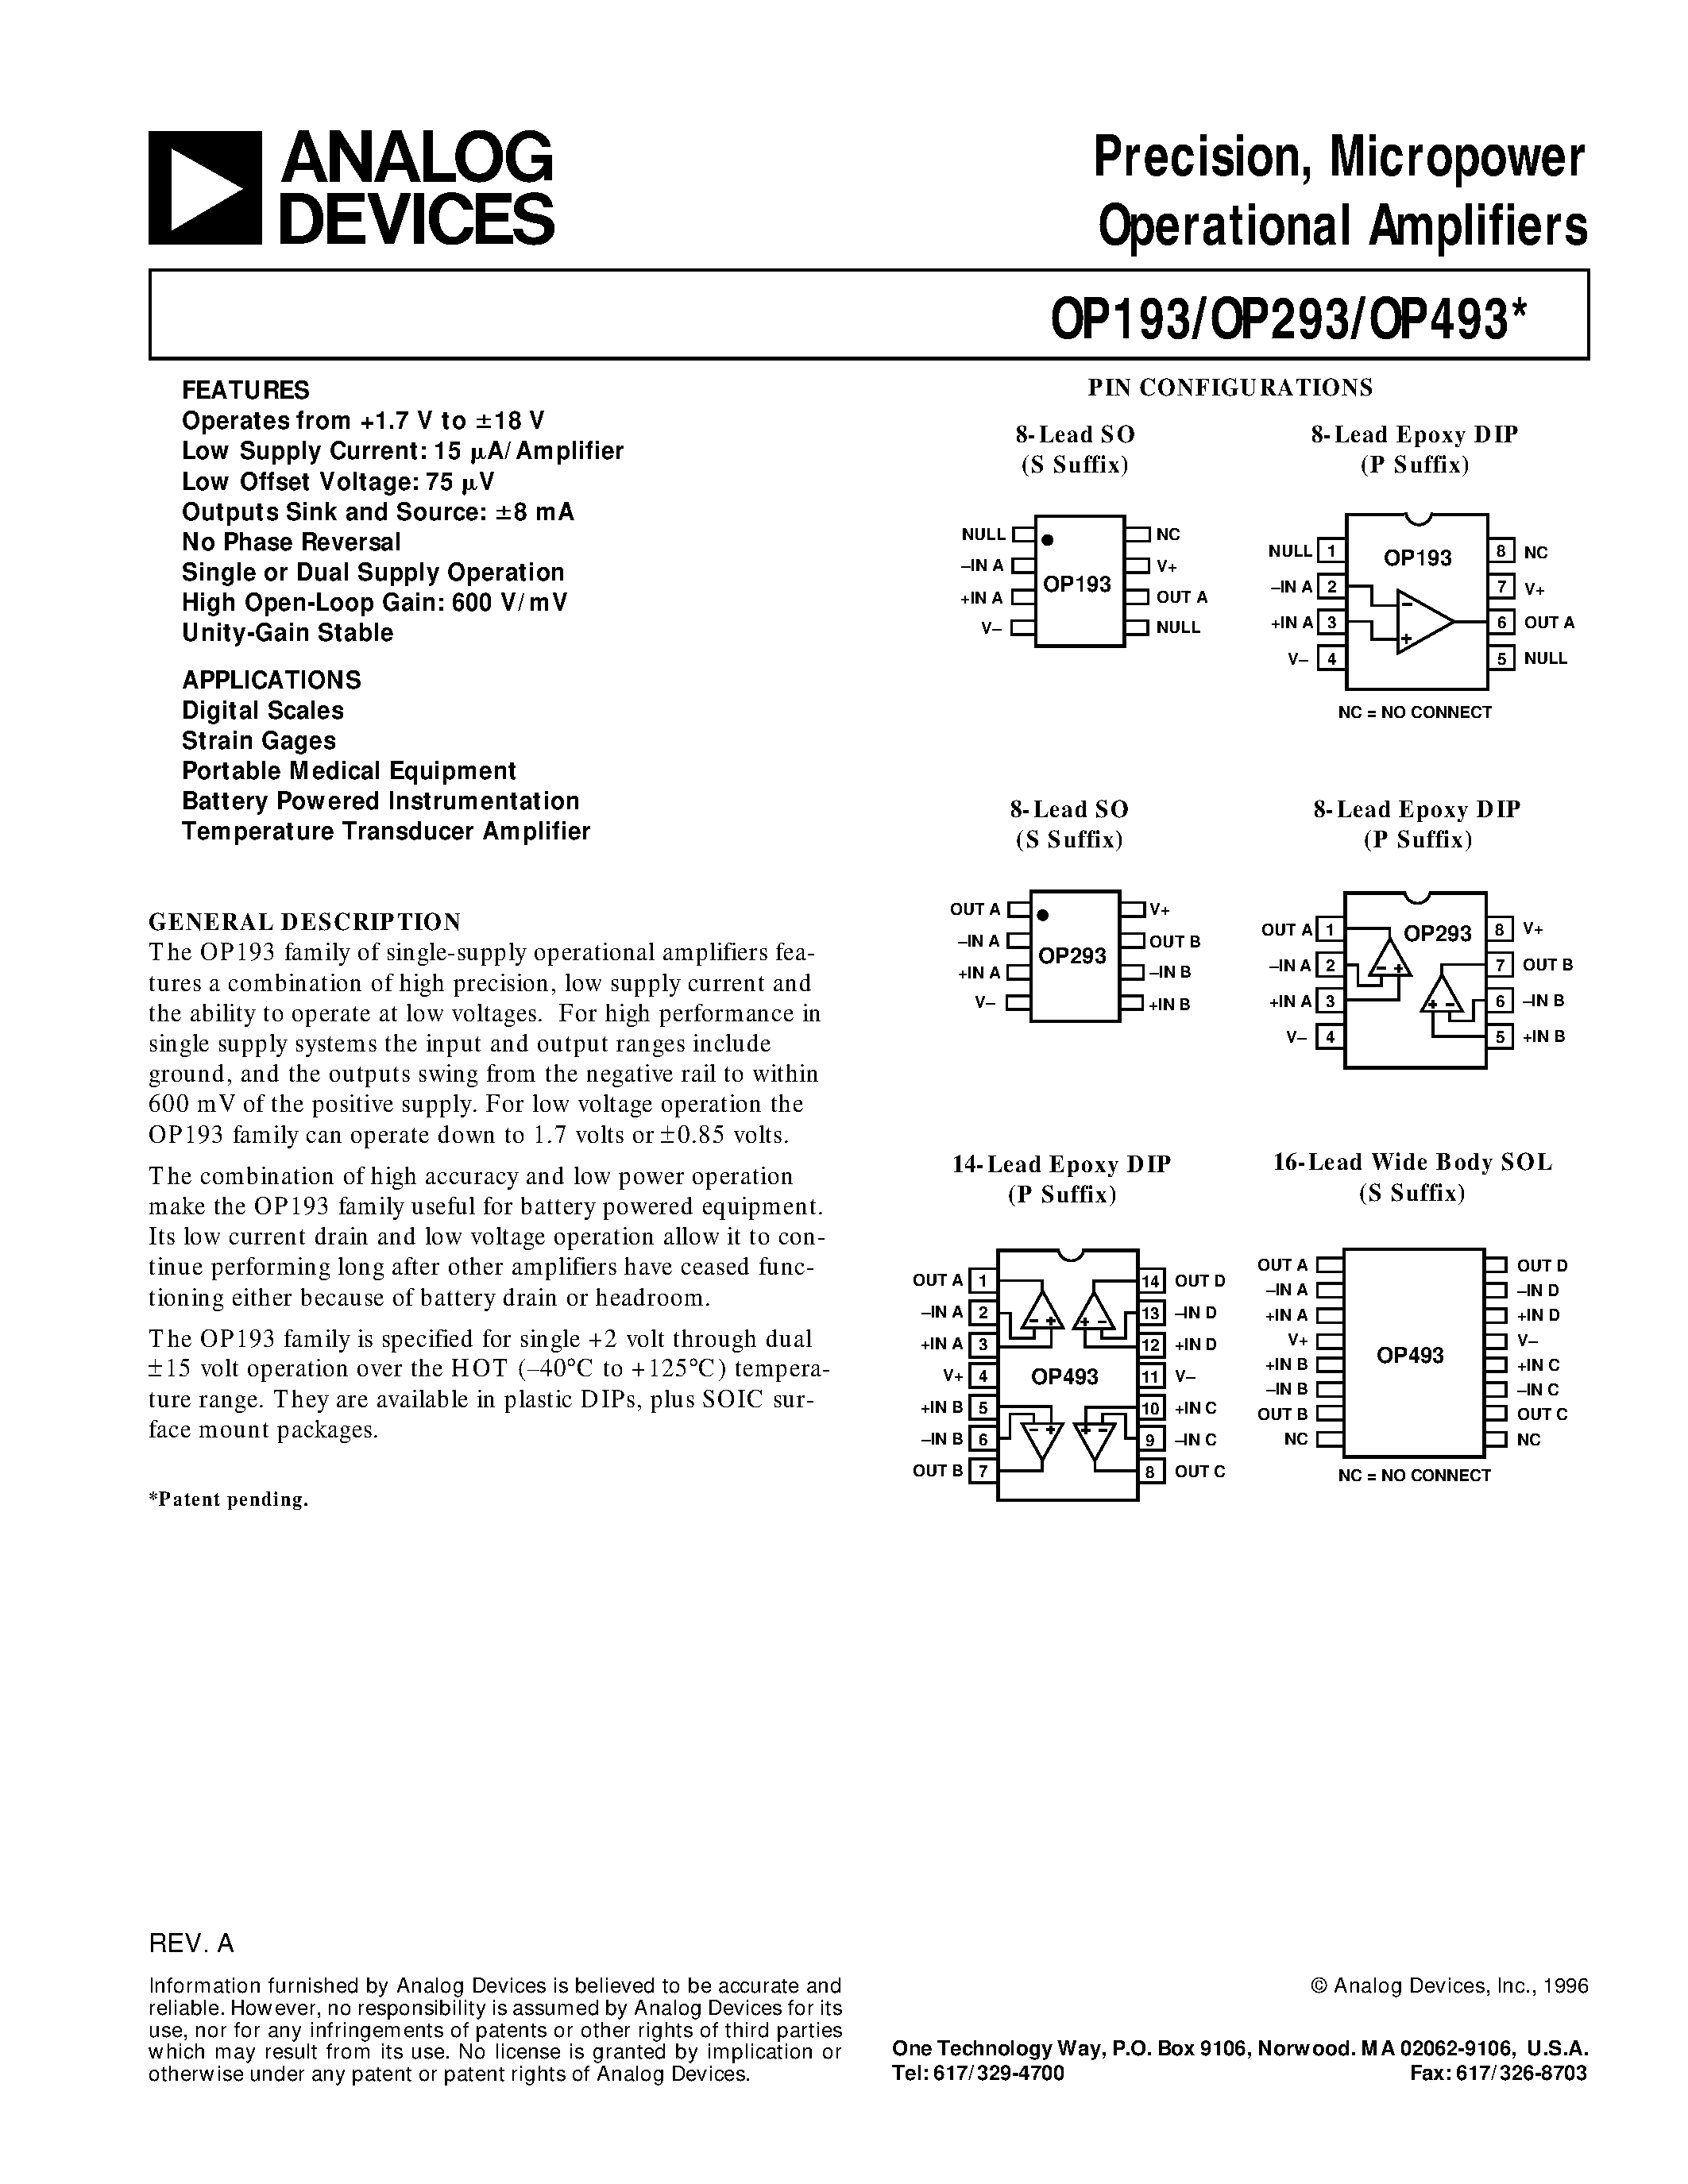 Datasheet OP193 - Precision / Micropower Operational Amplifiers page 1